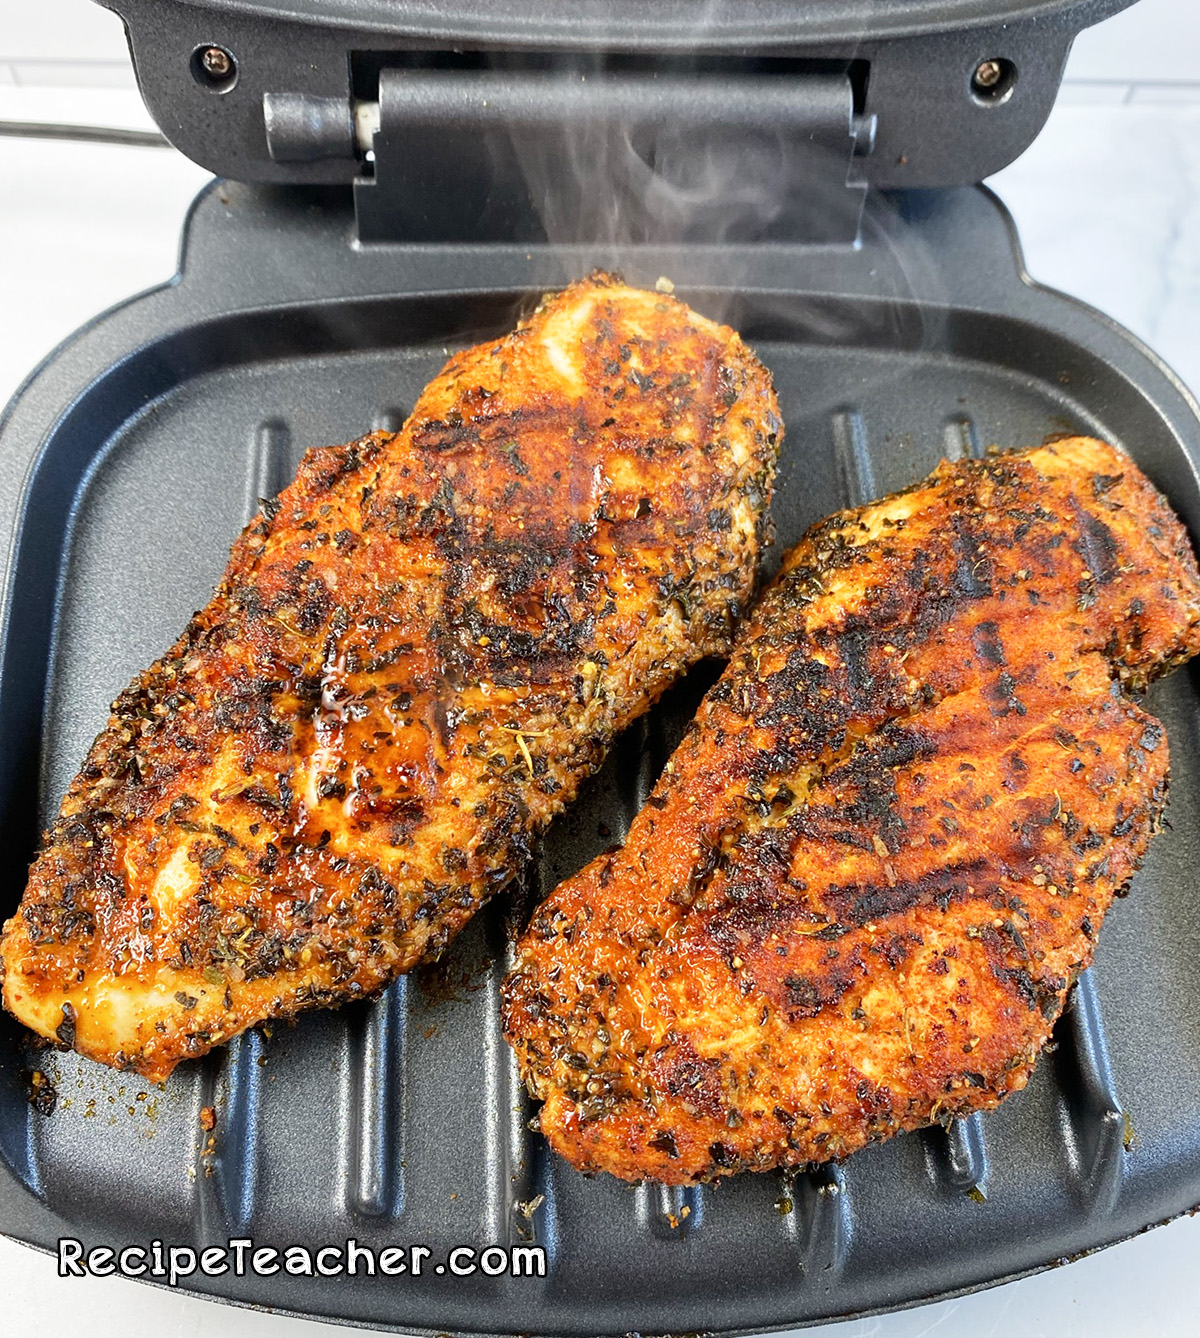 Recipe for George Foreman Grilled Boneless, Skinless Chicken Breasts